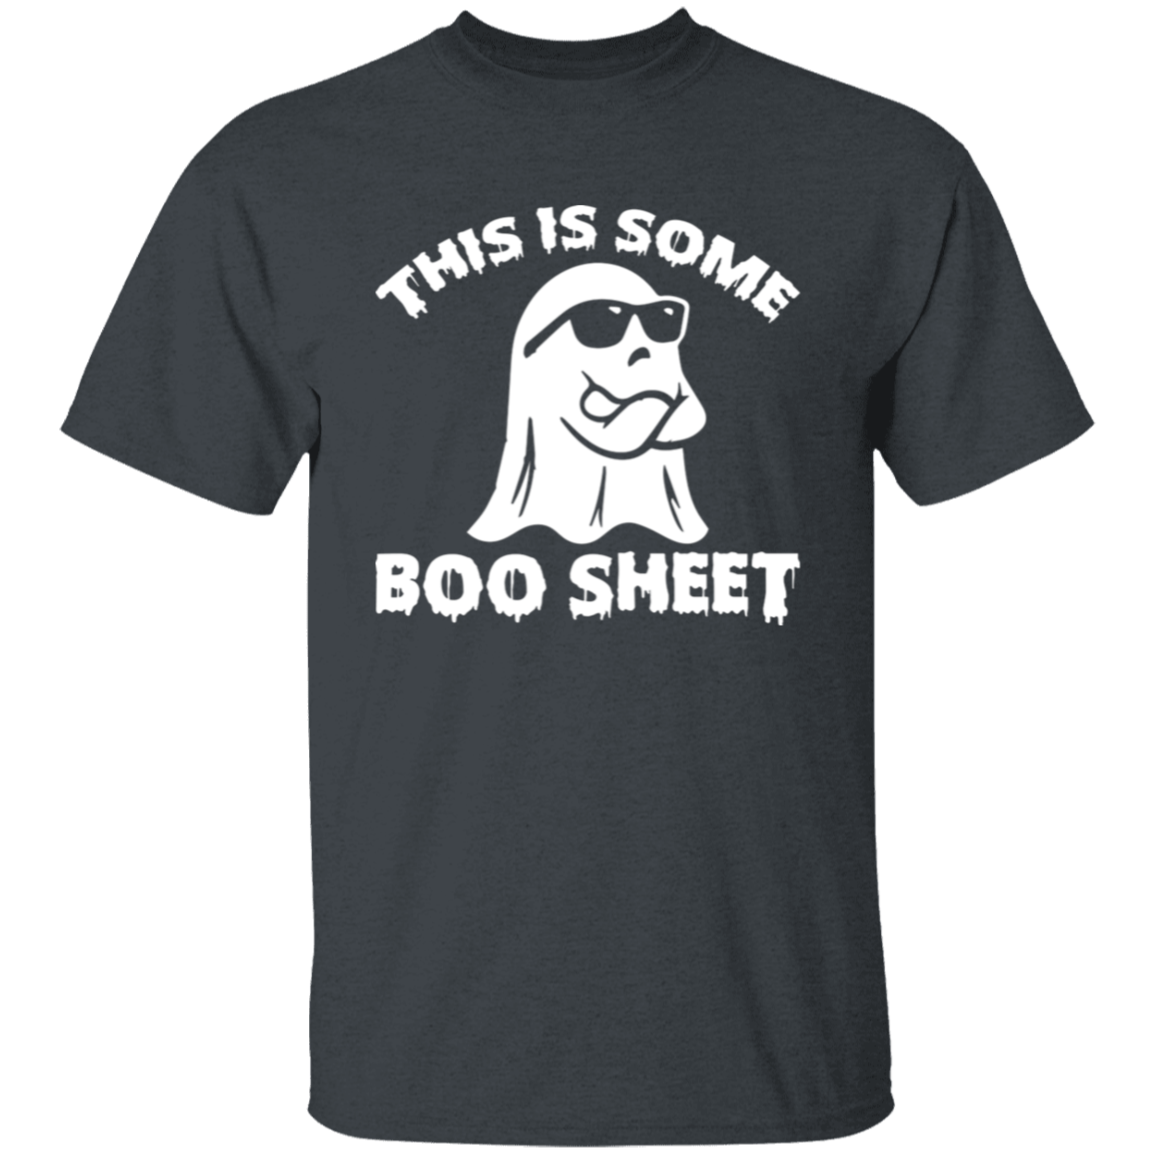 This is Some Boo Sheet  T-Shirt